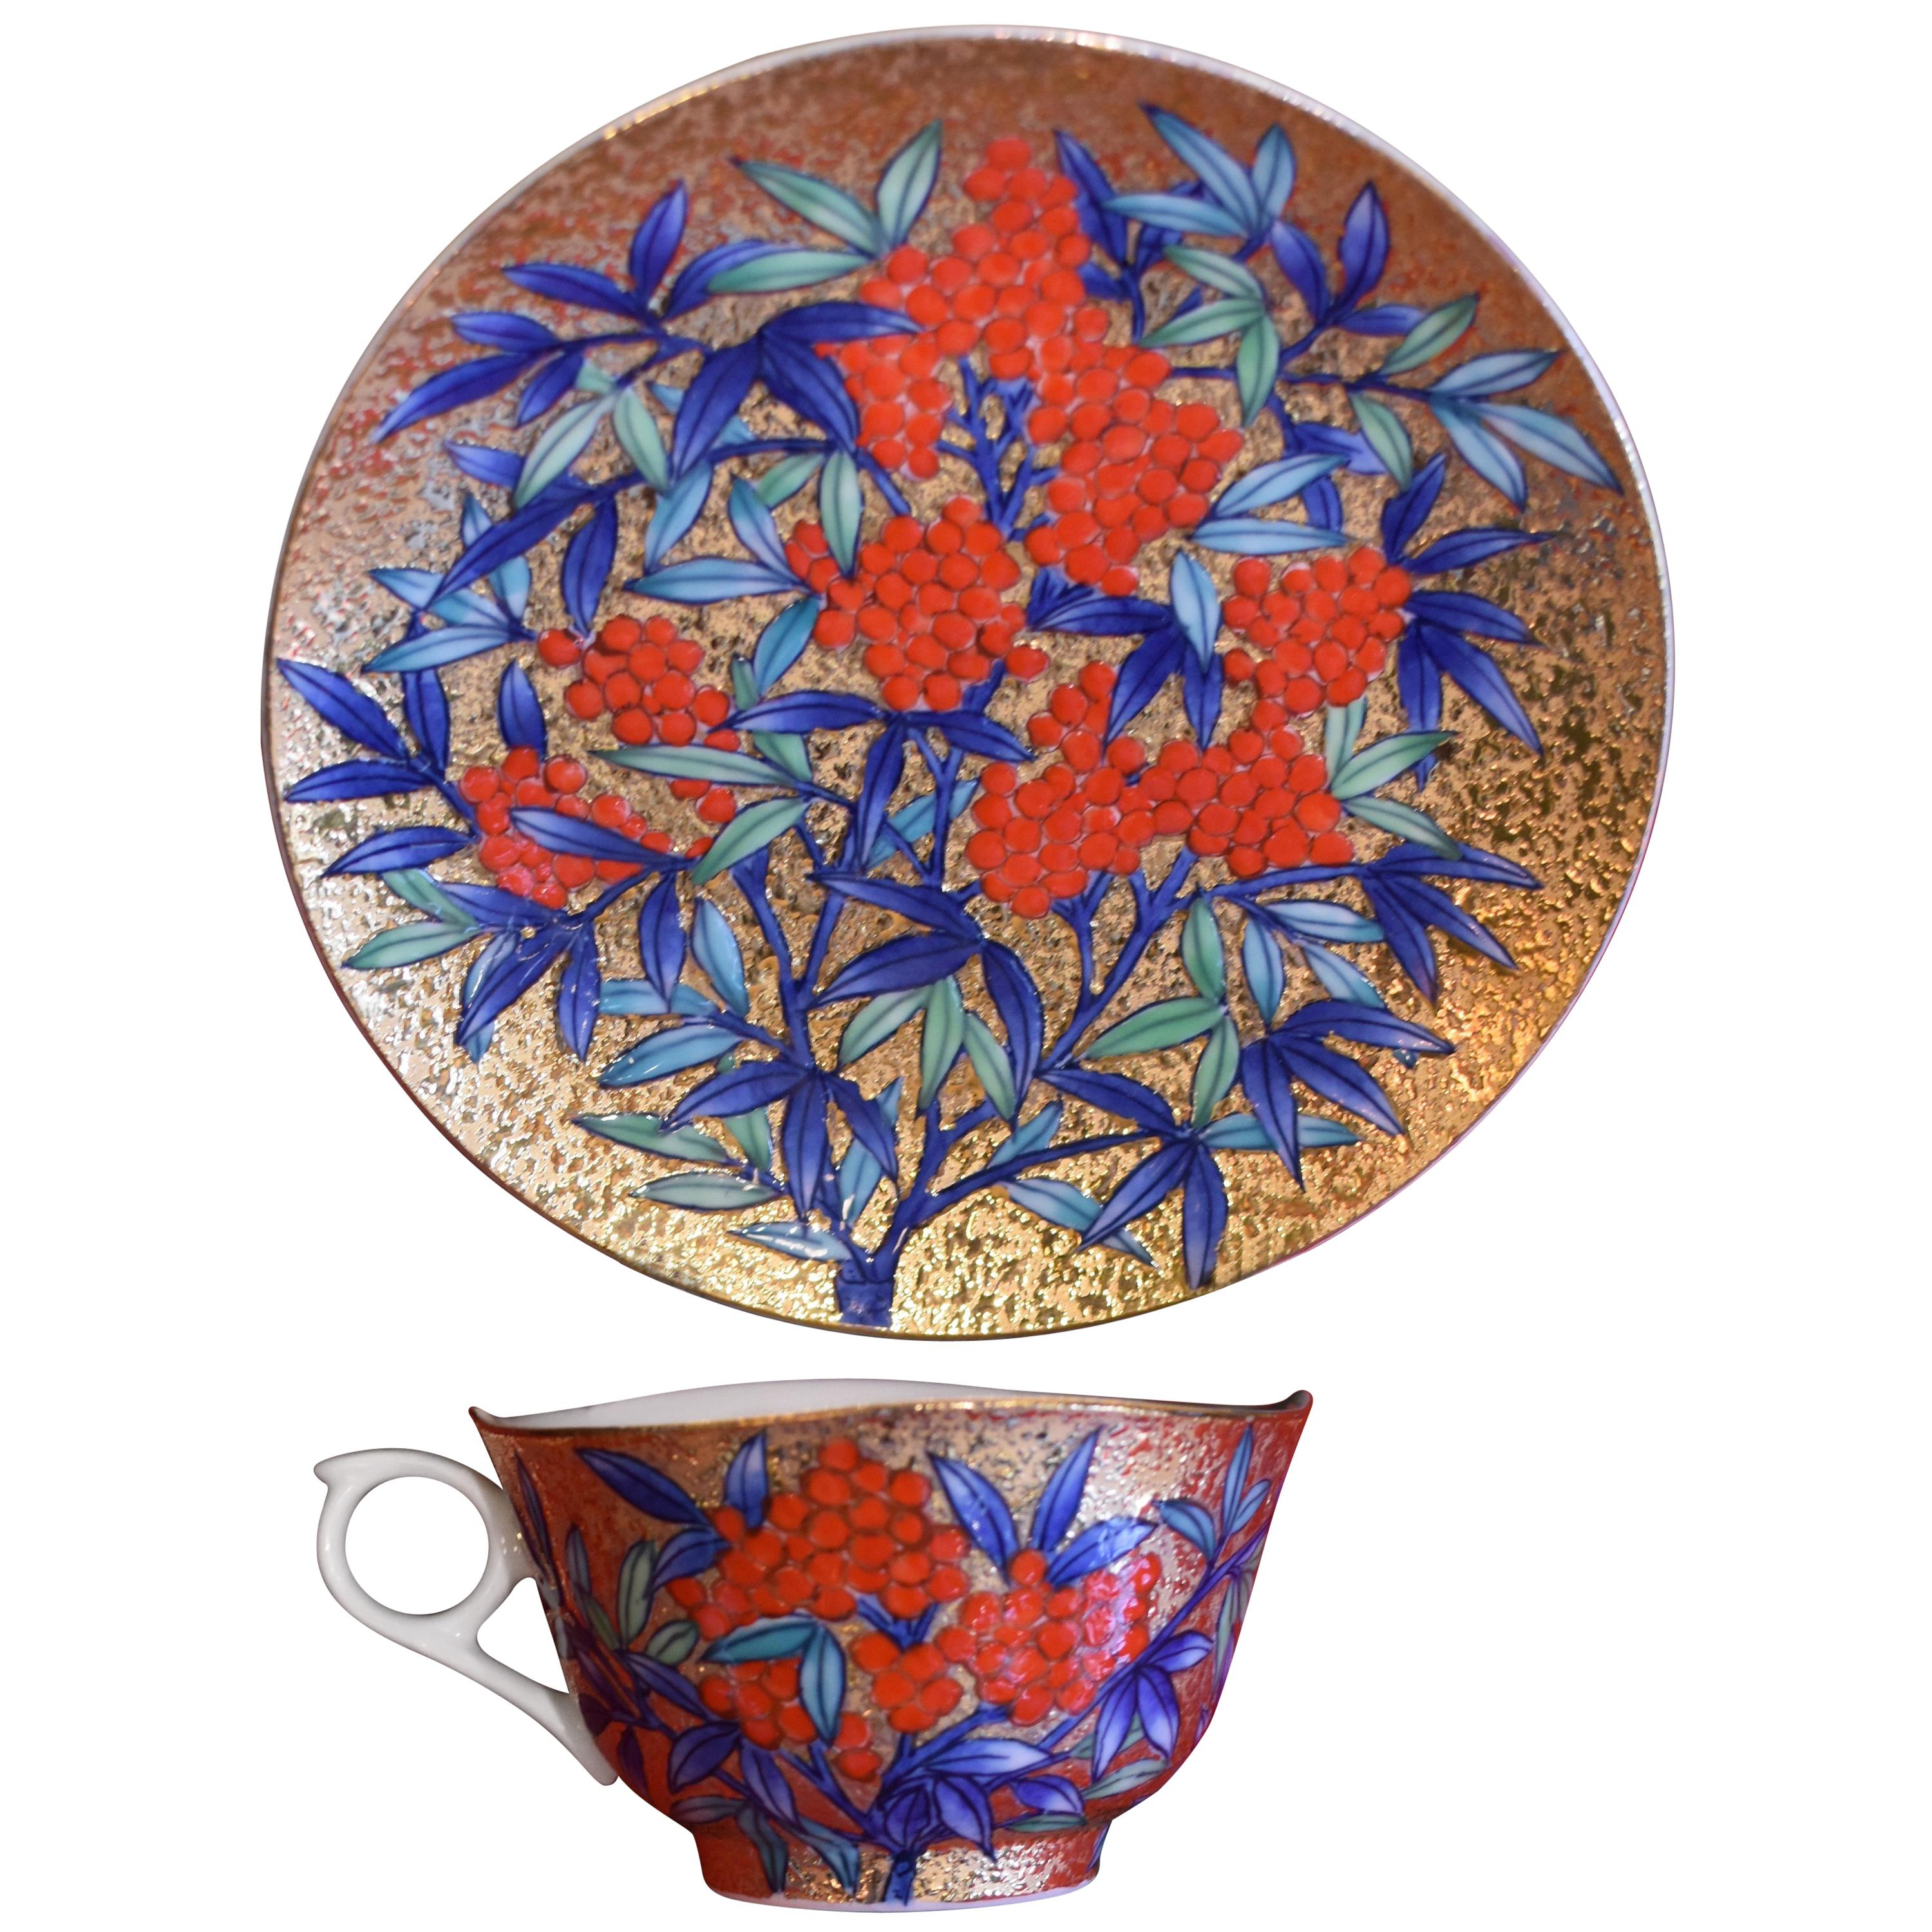 Gilded Japanese red Blue Porcelain Cup and Saucer by Master Artist